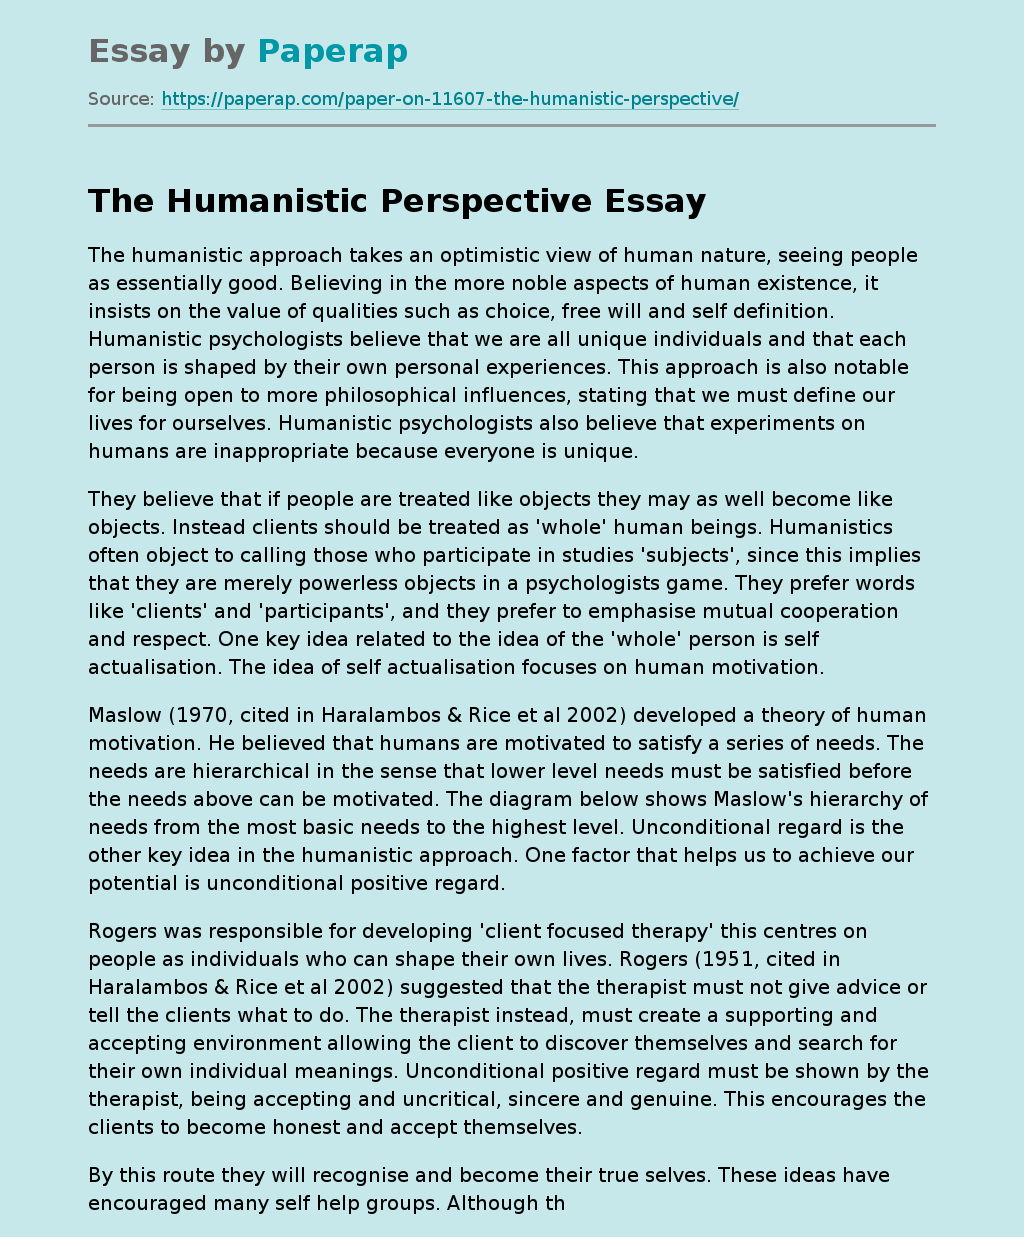 The Humanistic Perspective